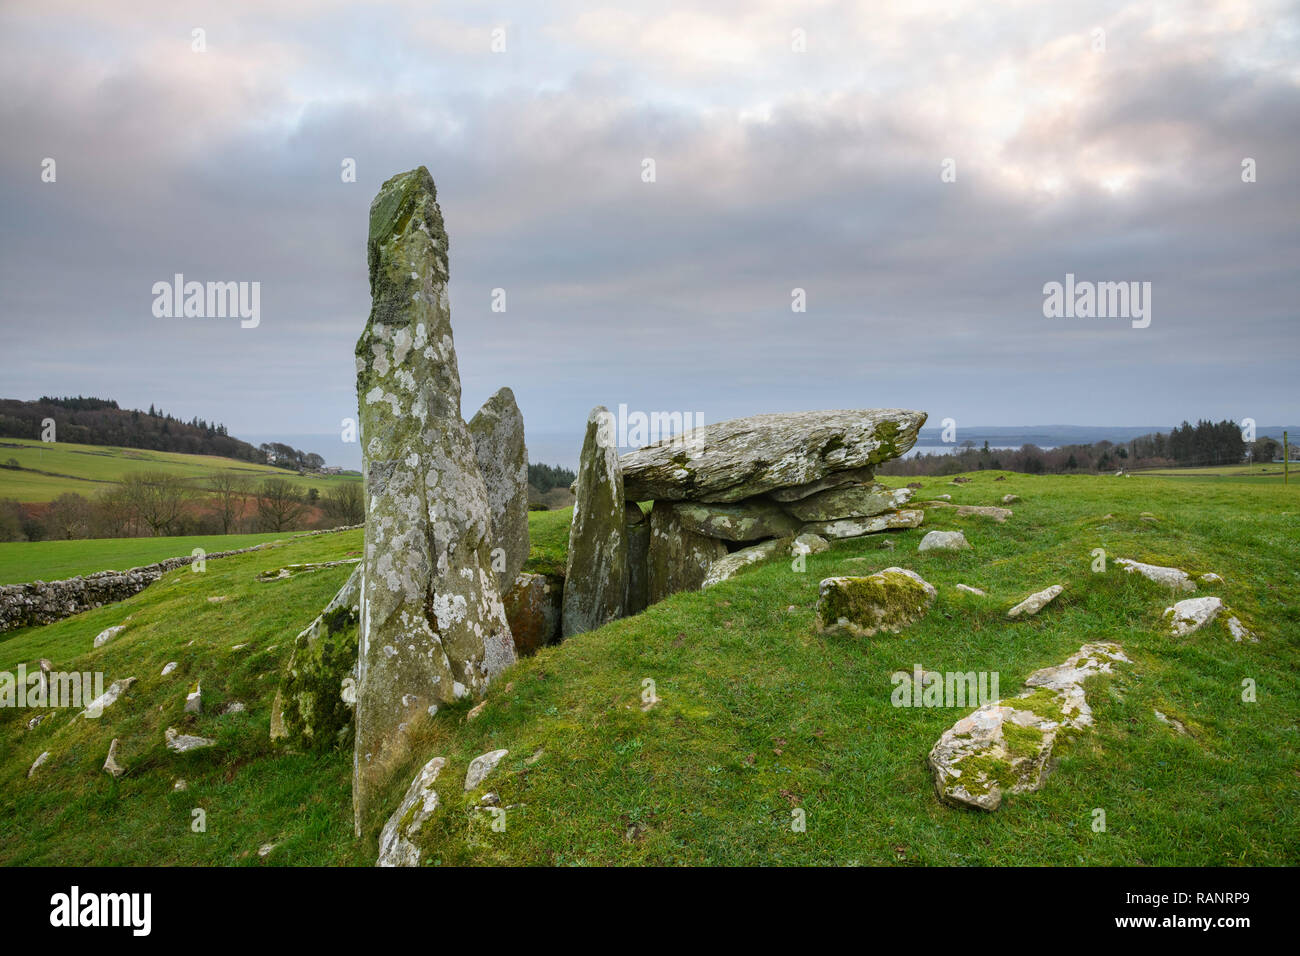 Cairn Holy 2, Neolithic burial chamber said to be the tomb of the mythical Scottish king Galdus, near Creetown, Dumfries & Galloway, Scotland Stock Photo